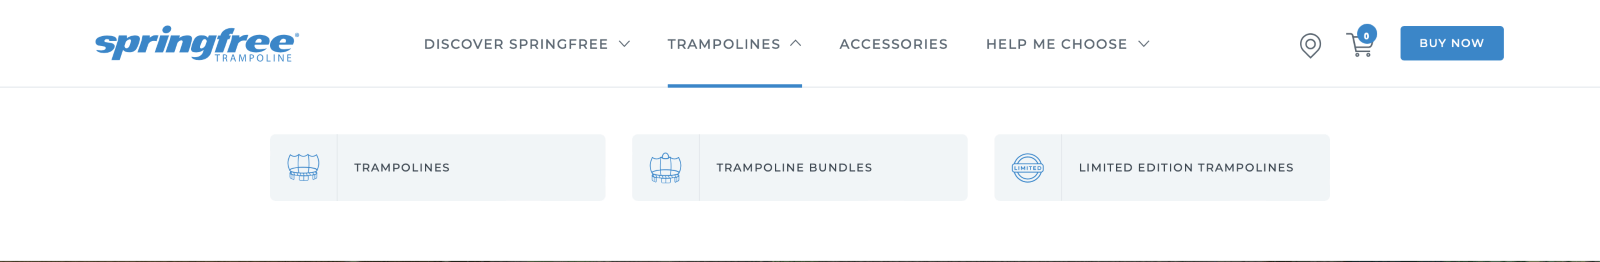 The Springfree "Trampolines" tab open